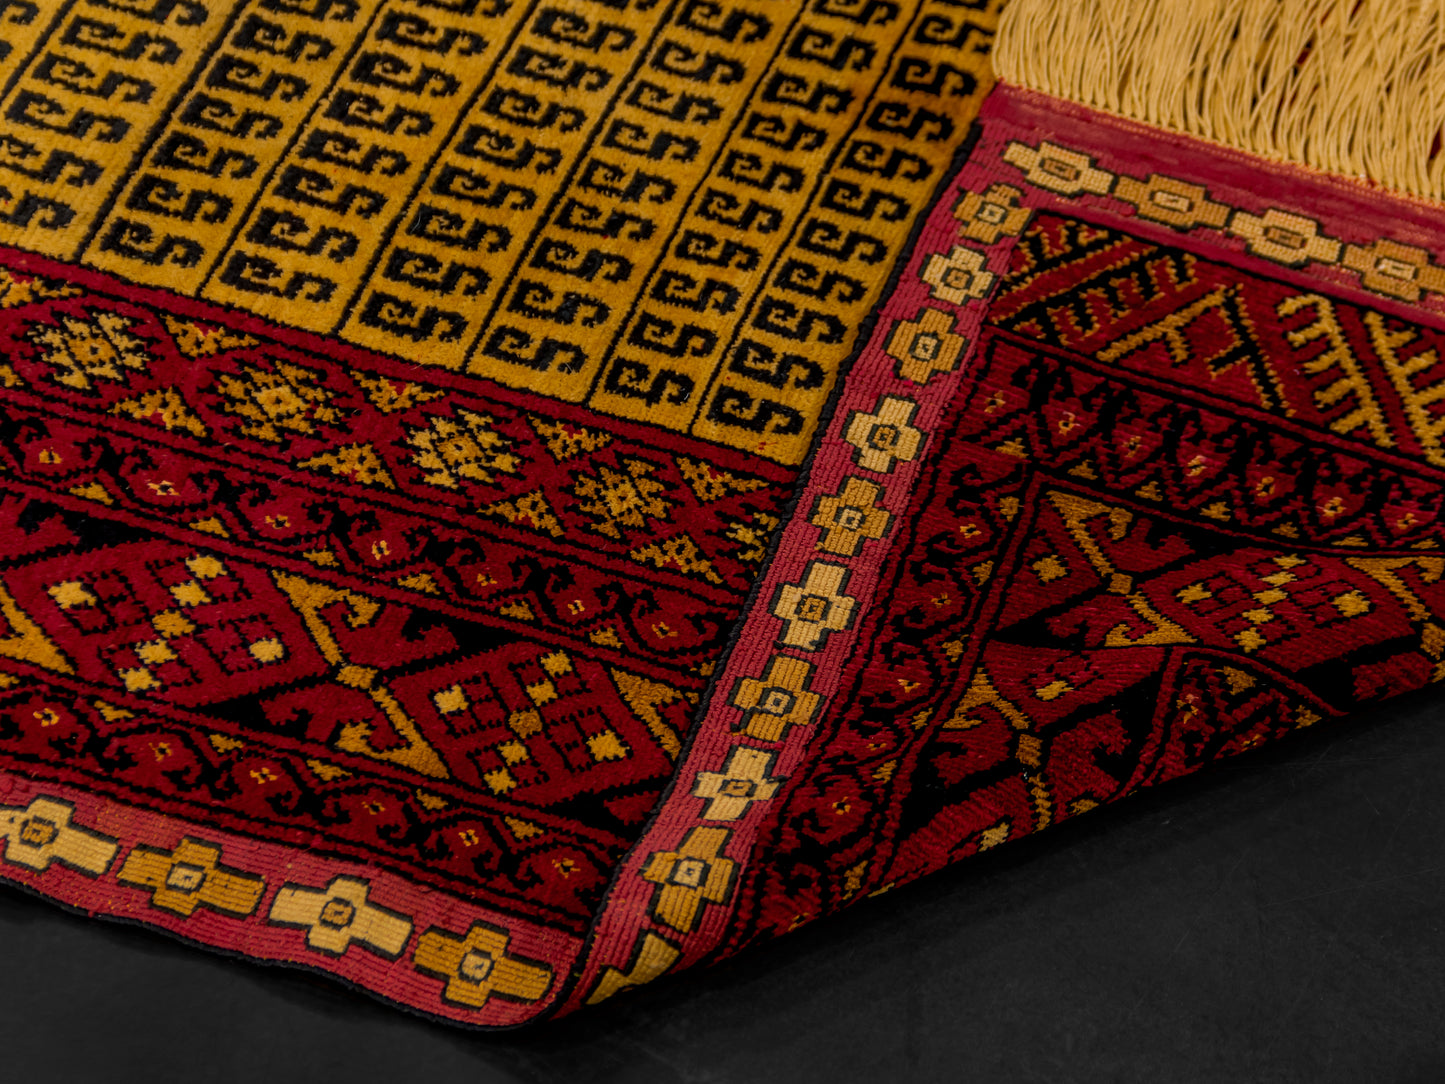 Unique Pure Silk Handmade Persian Baluch Rug product image #29972292403370